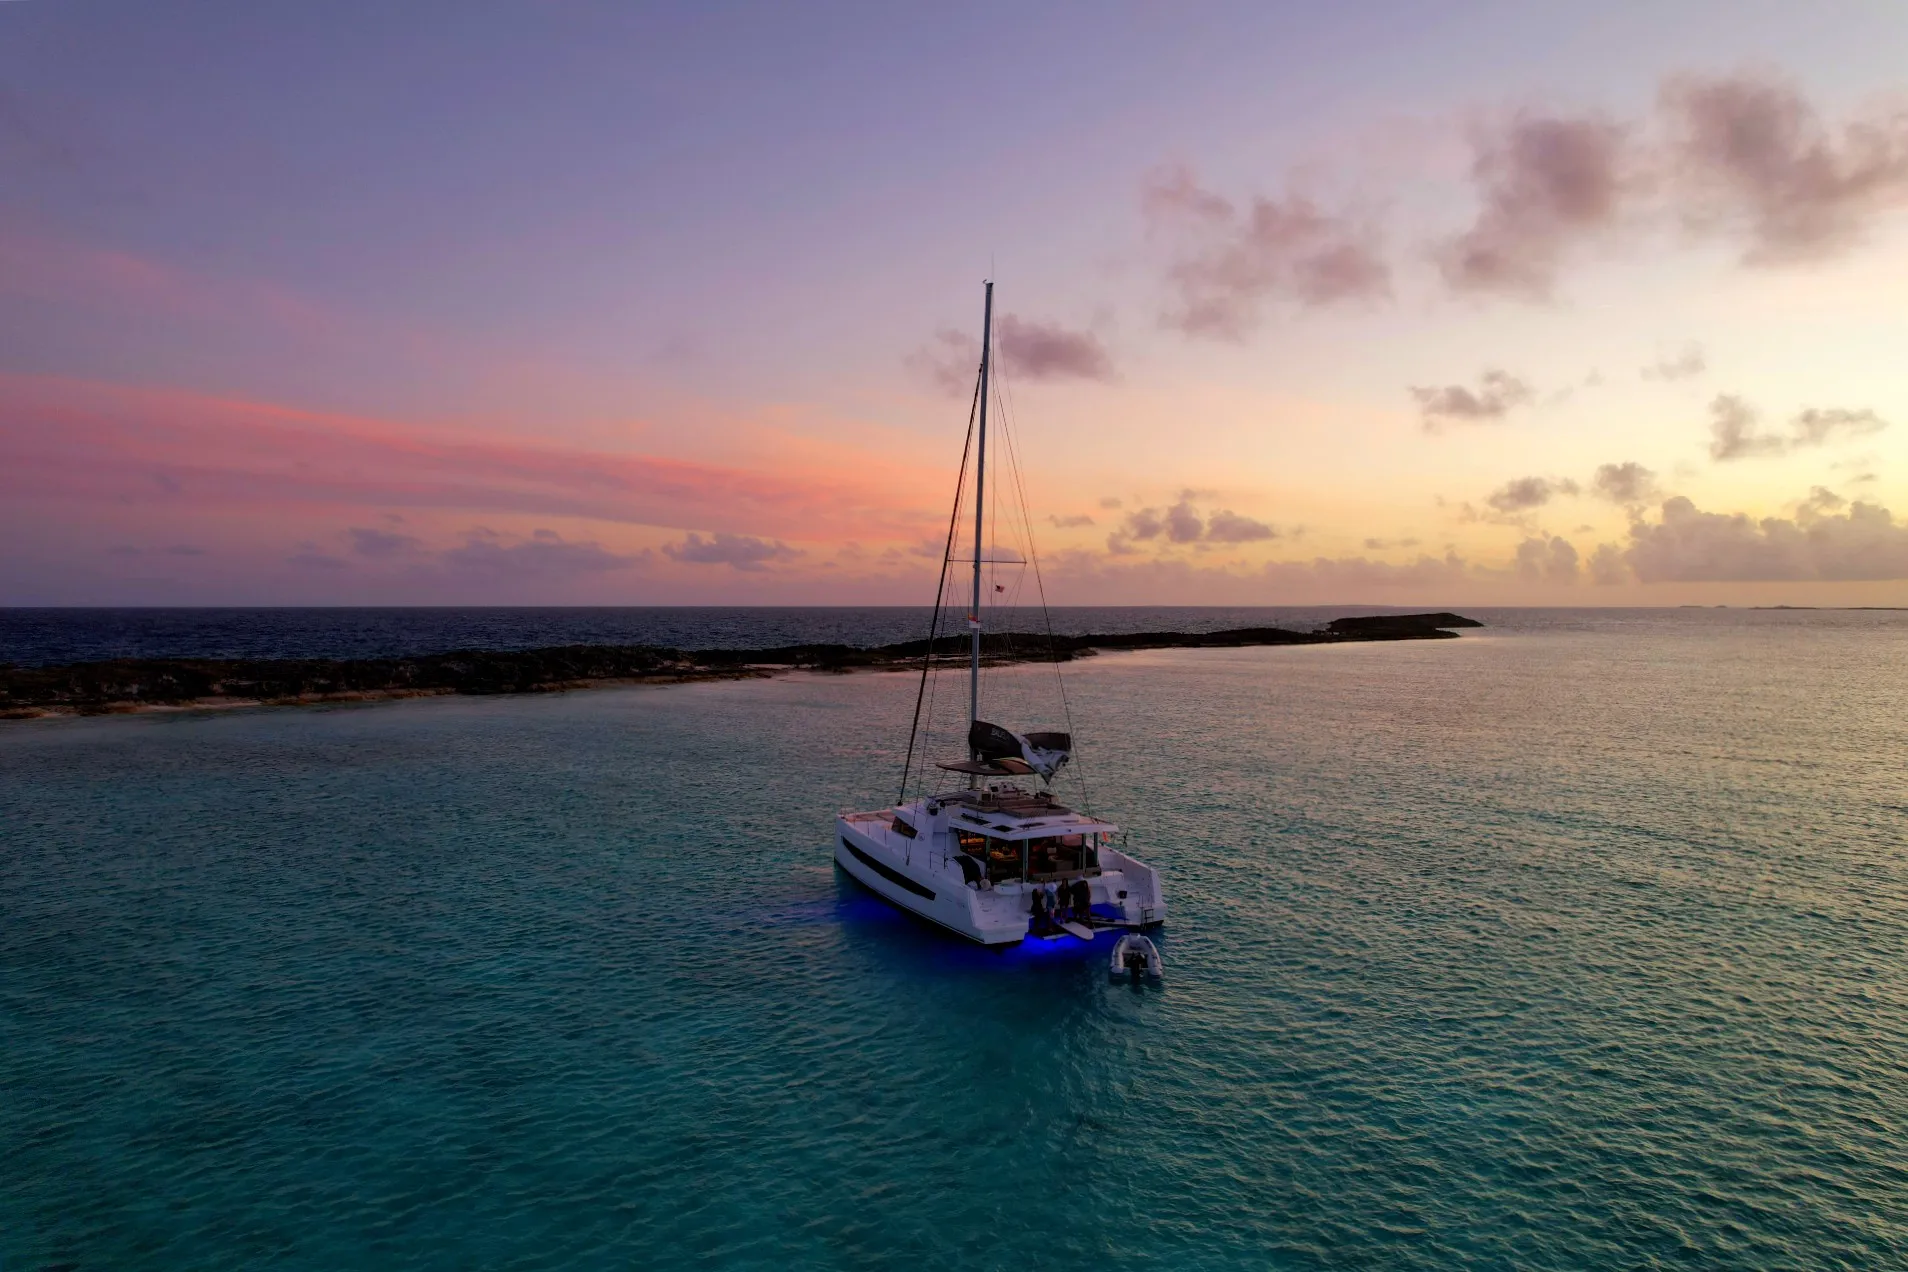 Set sail in Exuma, Bahamas for an unparalleled yacht charter experience. Revel in the stunning blues, serene solitude, and fishing in this Caribbean gem.